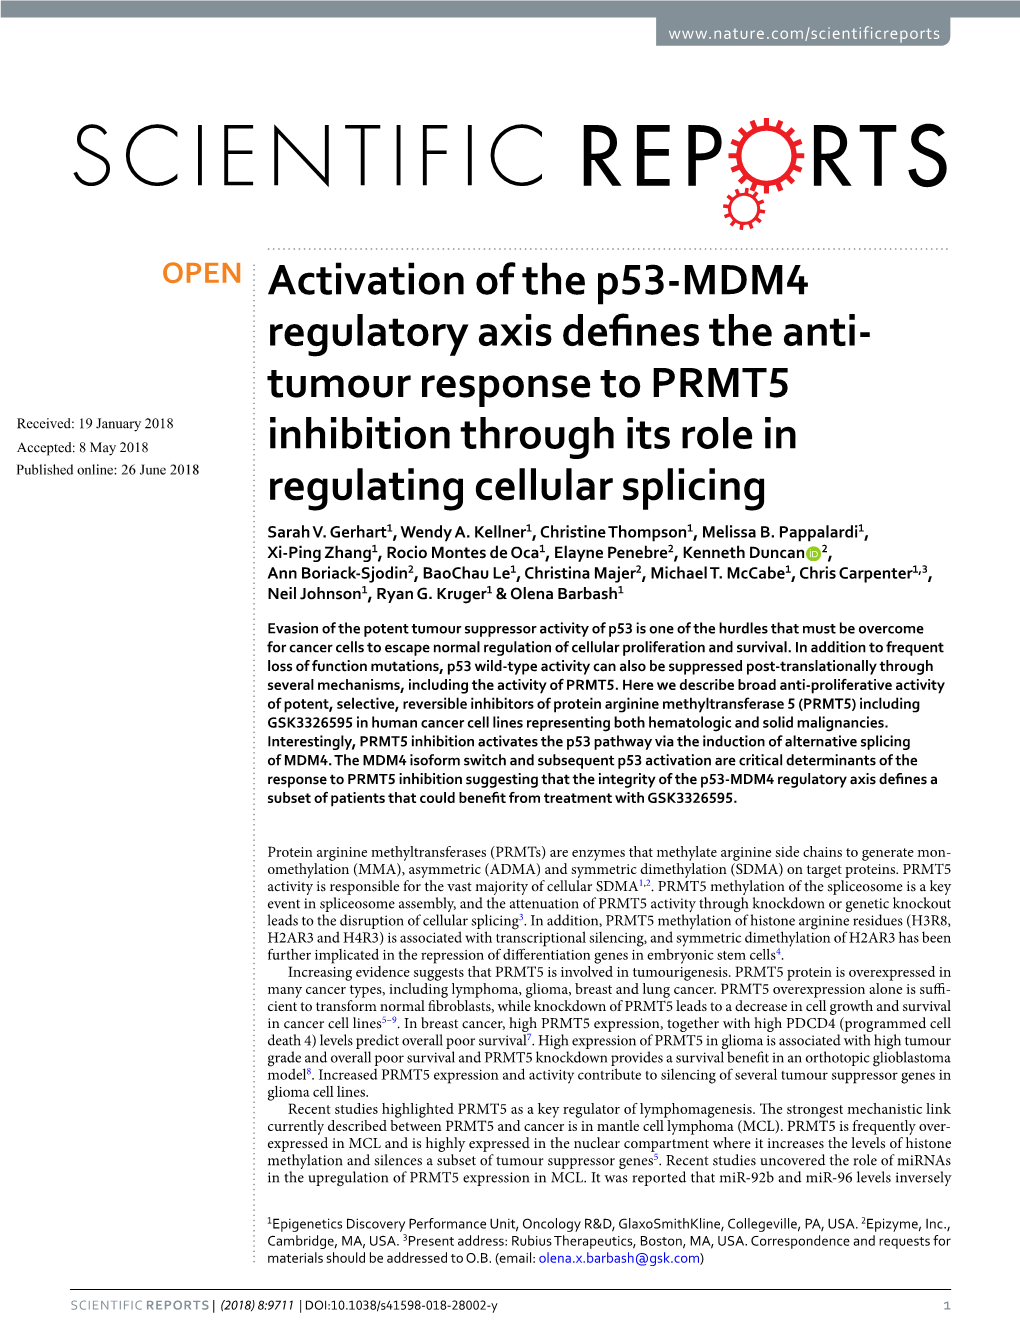 Activation of the P53-MDM4 Regulatory Axis Defines the Anti-Tumour